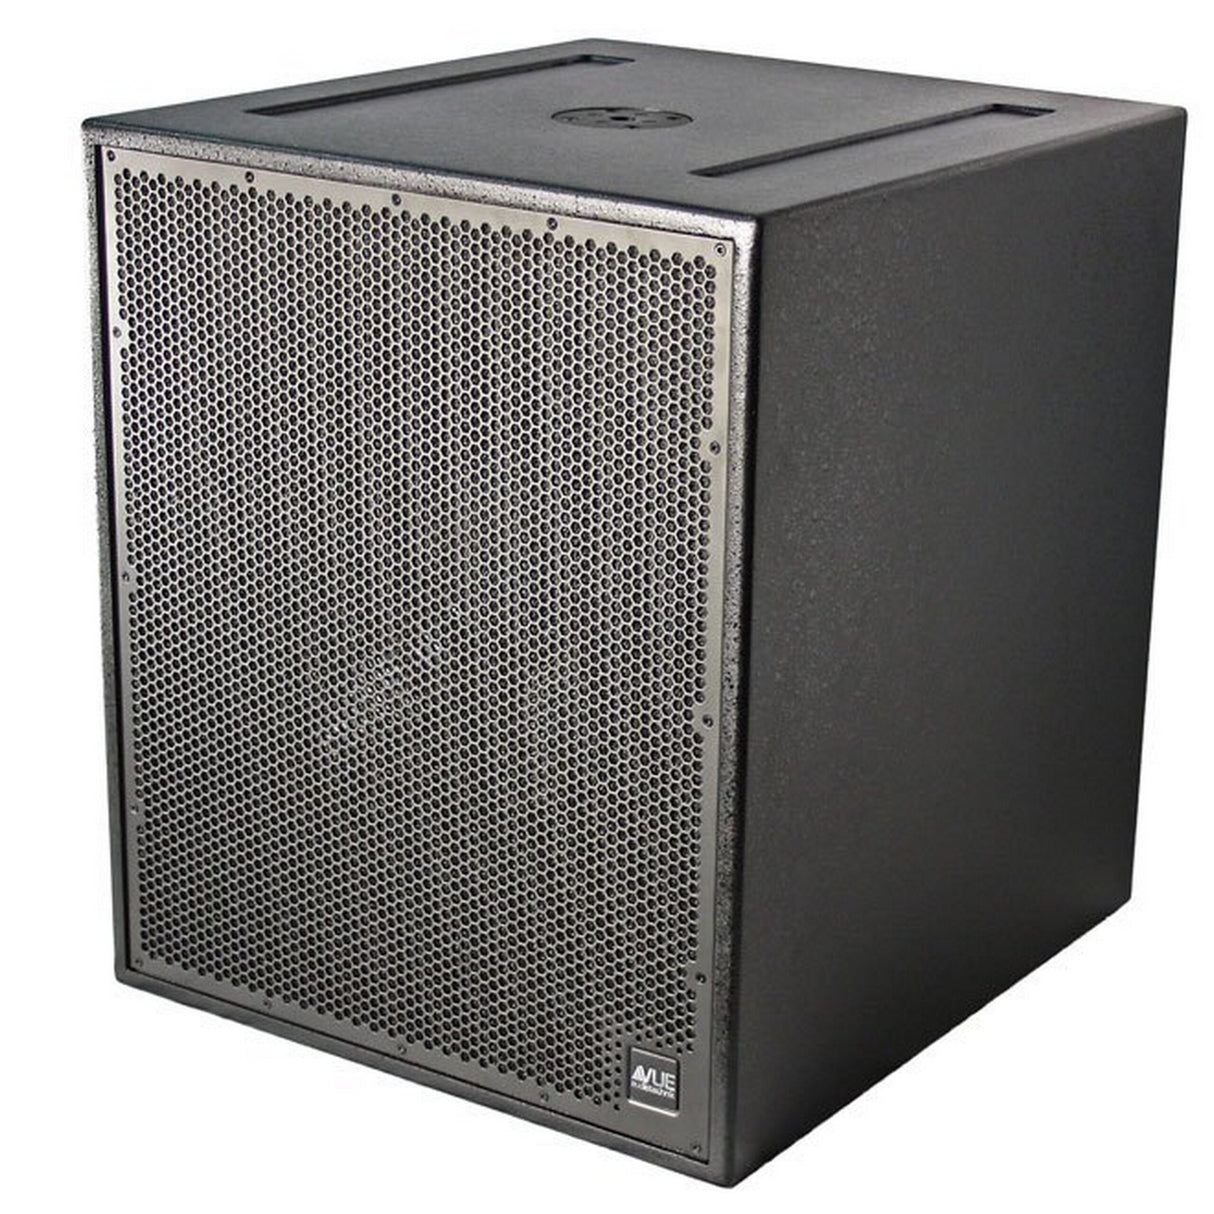 VUE Audiotechnik is-18 High Output Passive Installation Subwoofer, Single 18 Inch